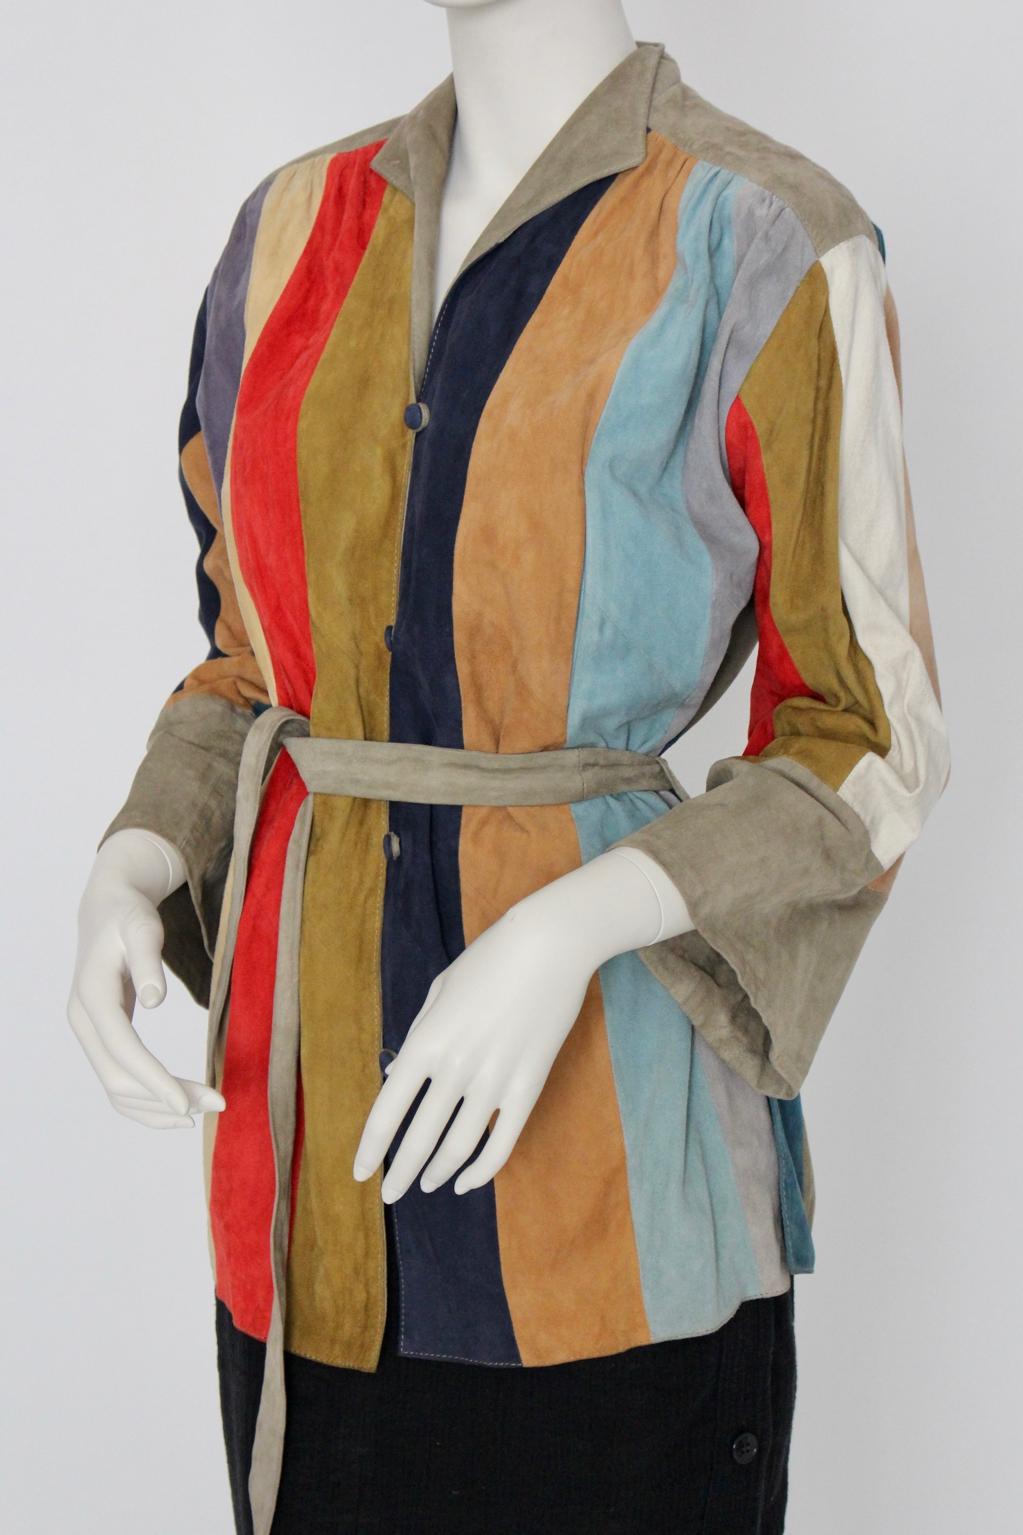 Women's Multicolored Suede Vintage Leather Jacket, France 1970s